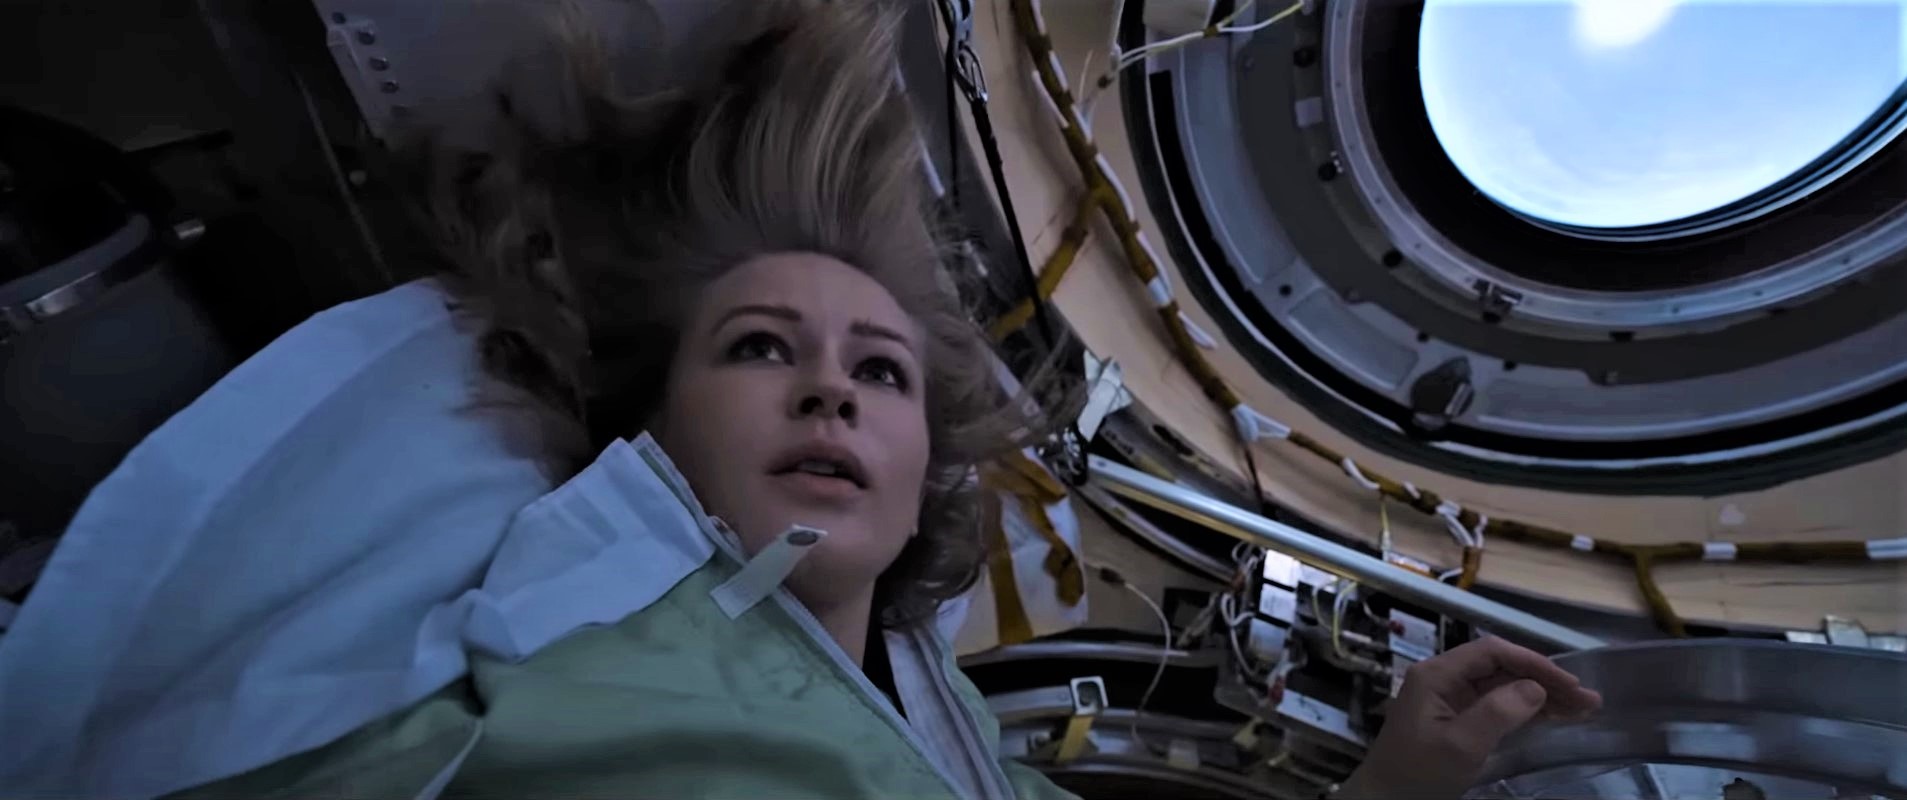 The Challenge, the Russian movie shot in space on the International Space Station is shown in the first trailer